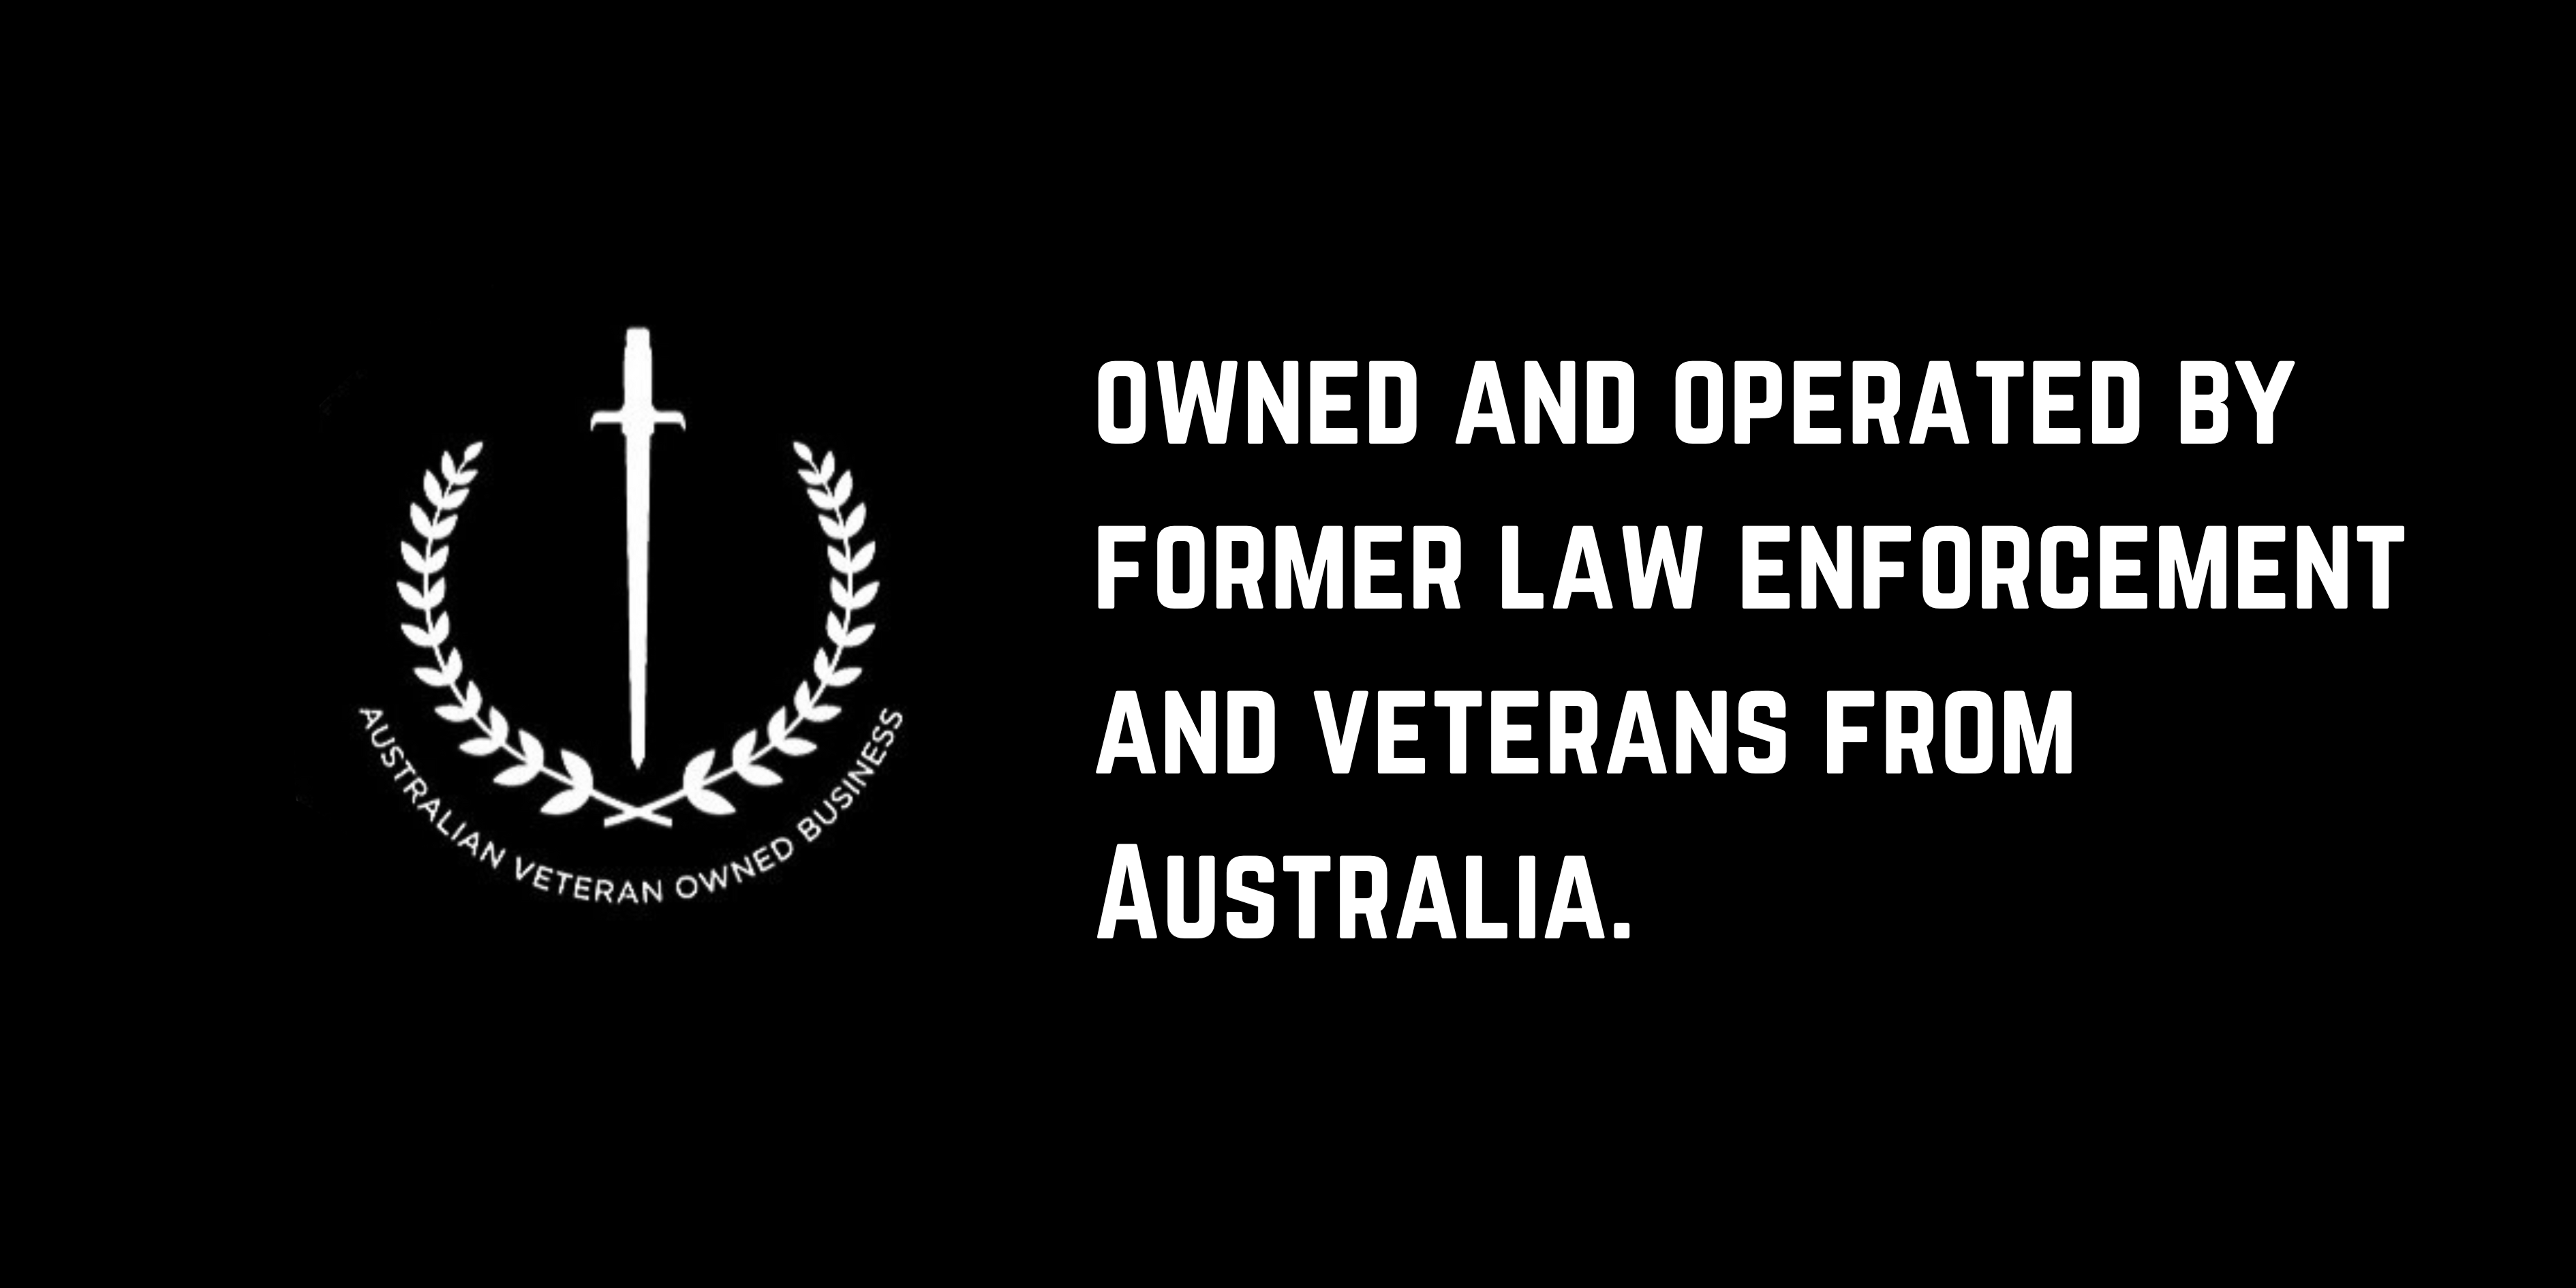 AKRYPT is an Australian Veteran Owned Business that provides tactical and safety lighting solutions